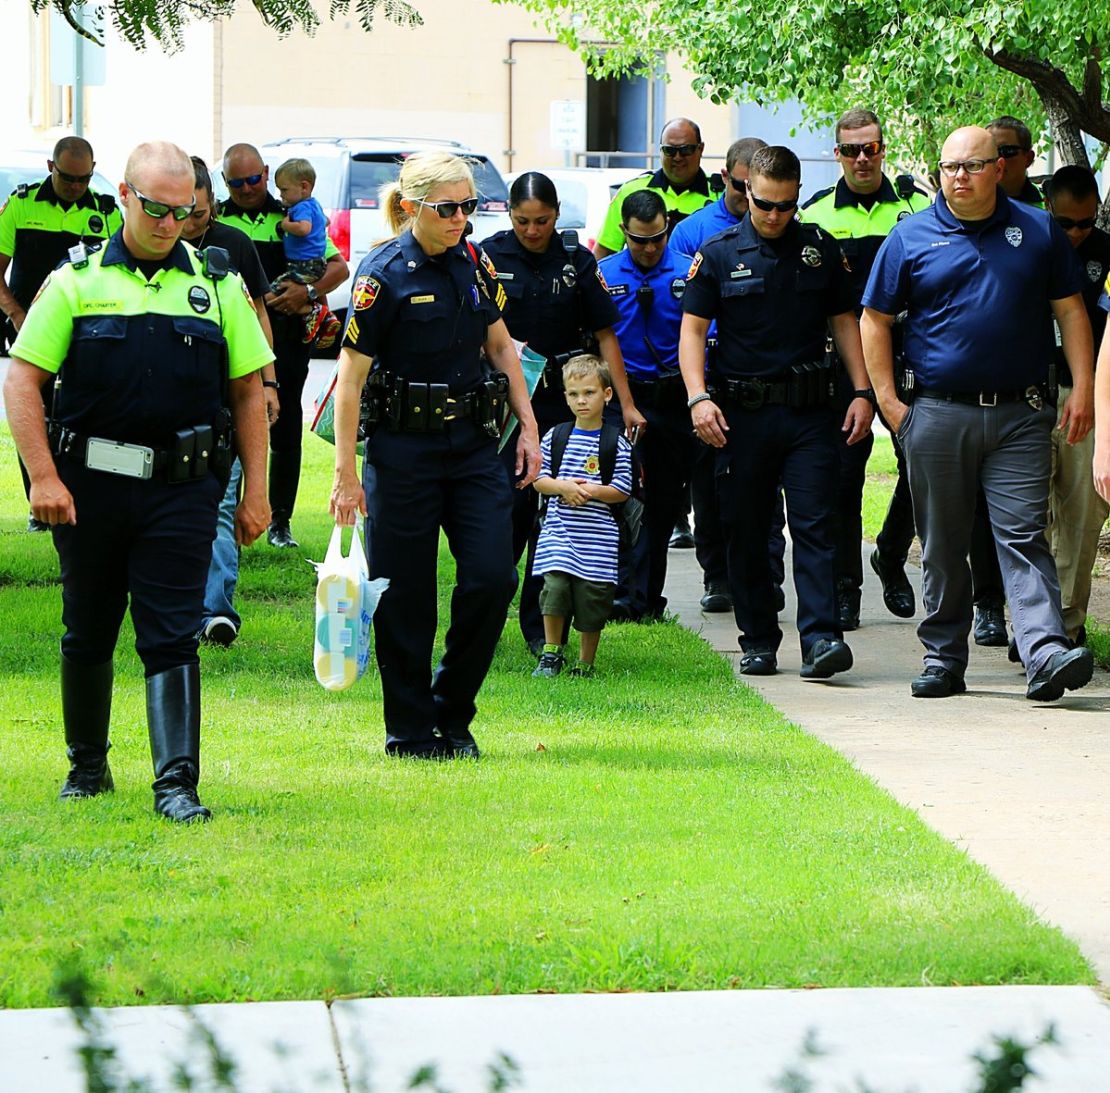 Jackson Scherlen walks with members of Amarillo police on his first day of school.